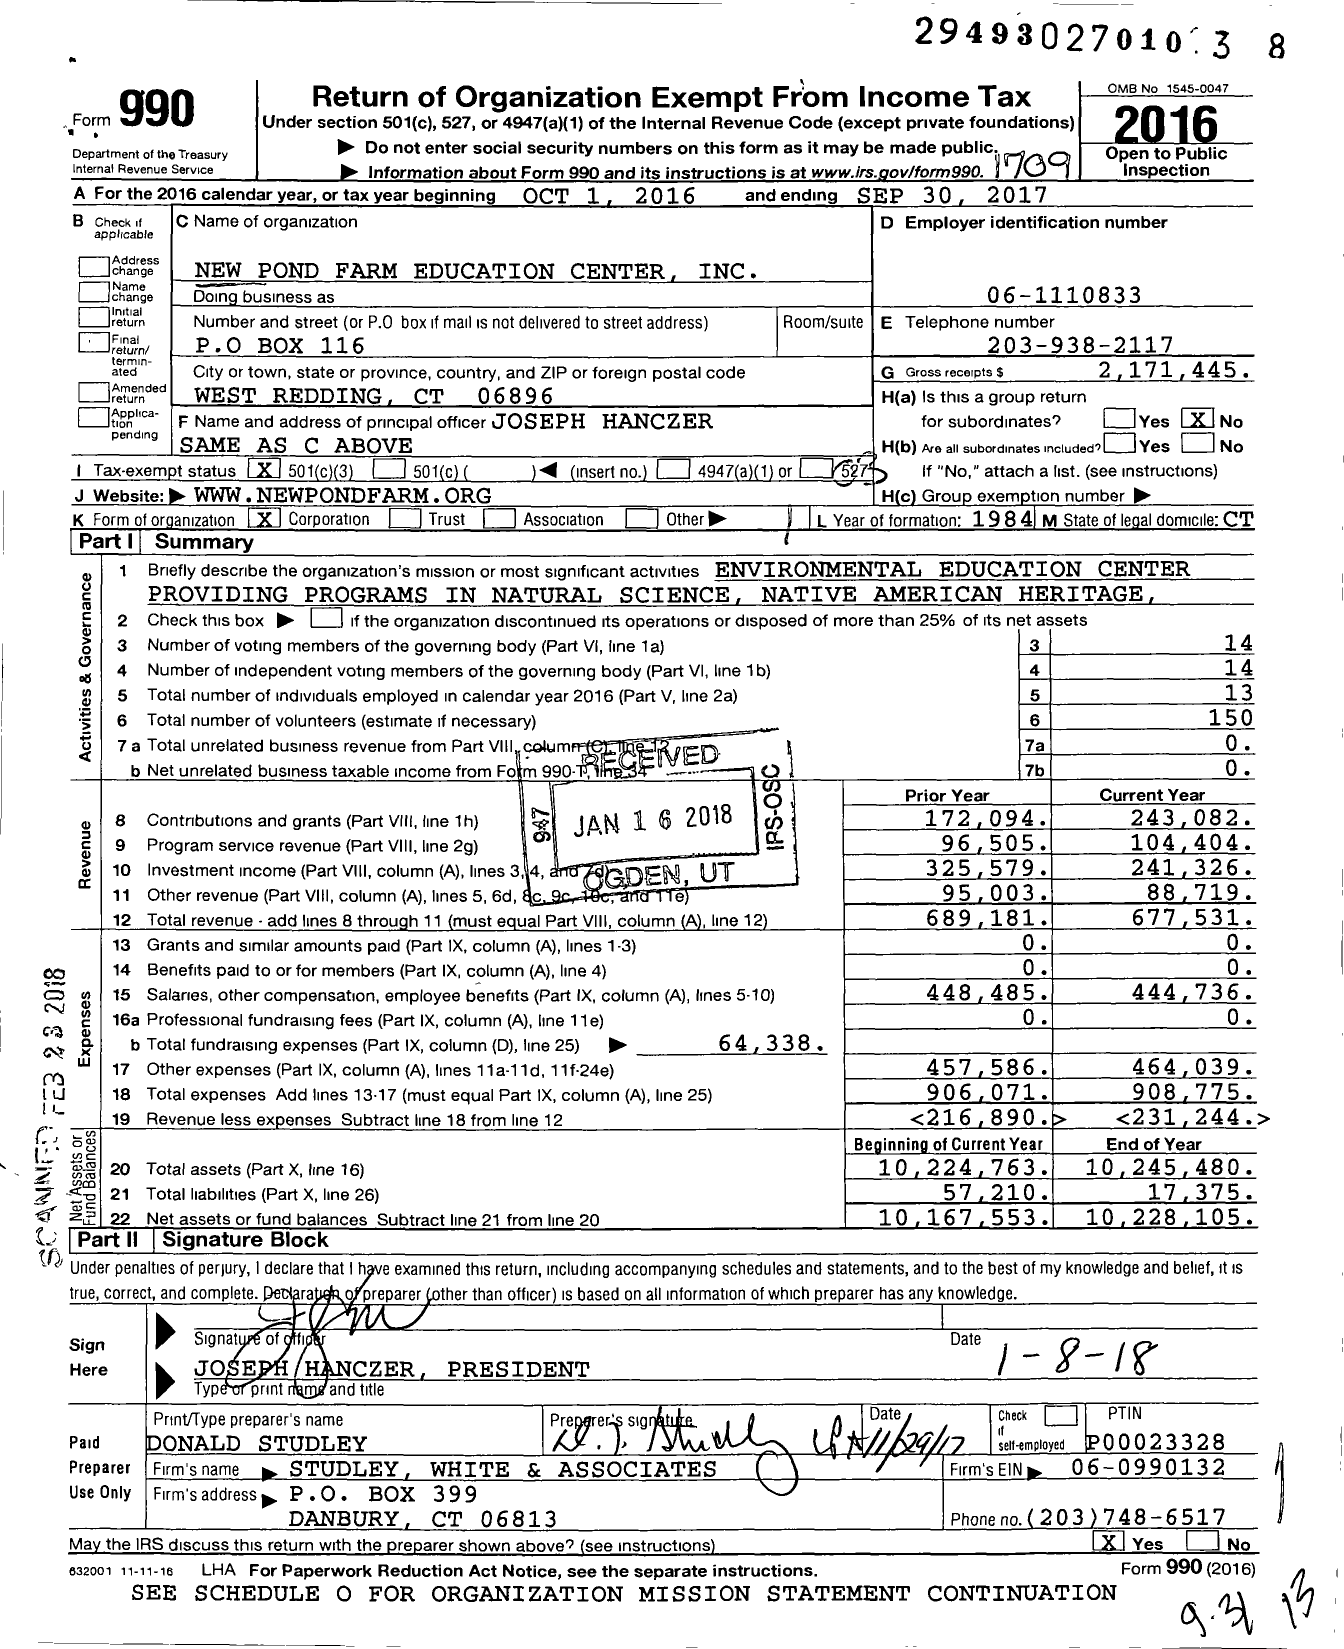 Image of first page of 2016 Form 990 for New Pond Farm Education Center